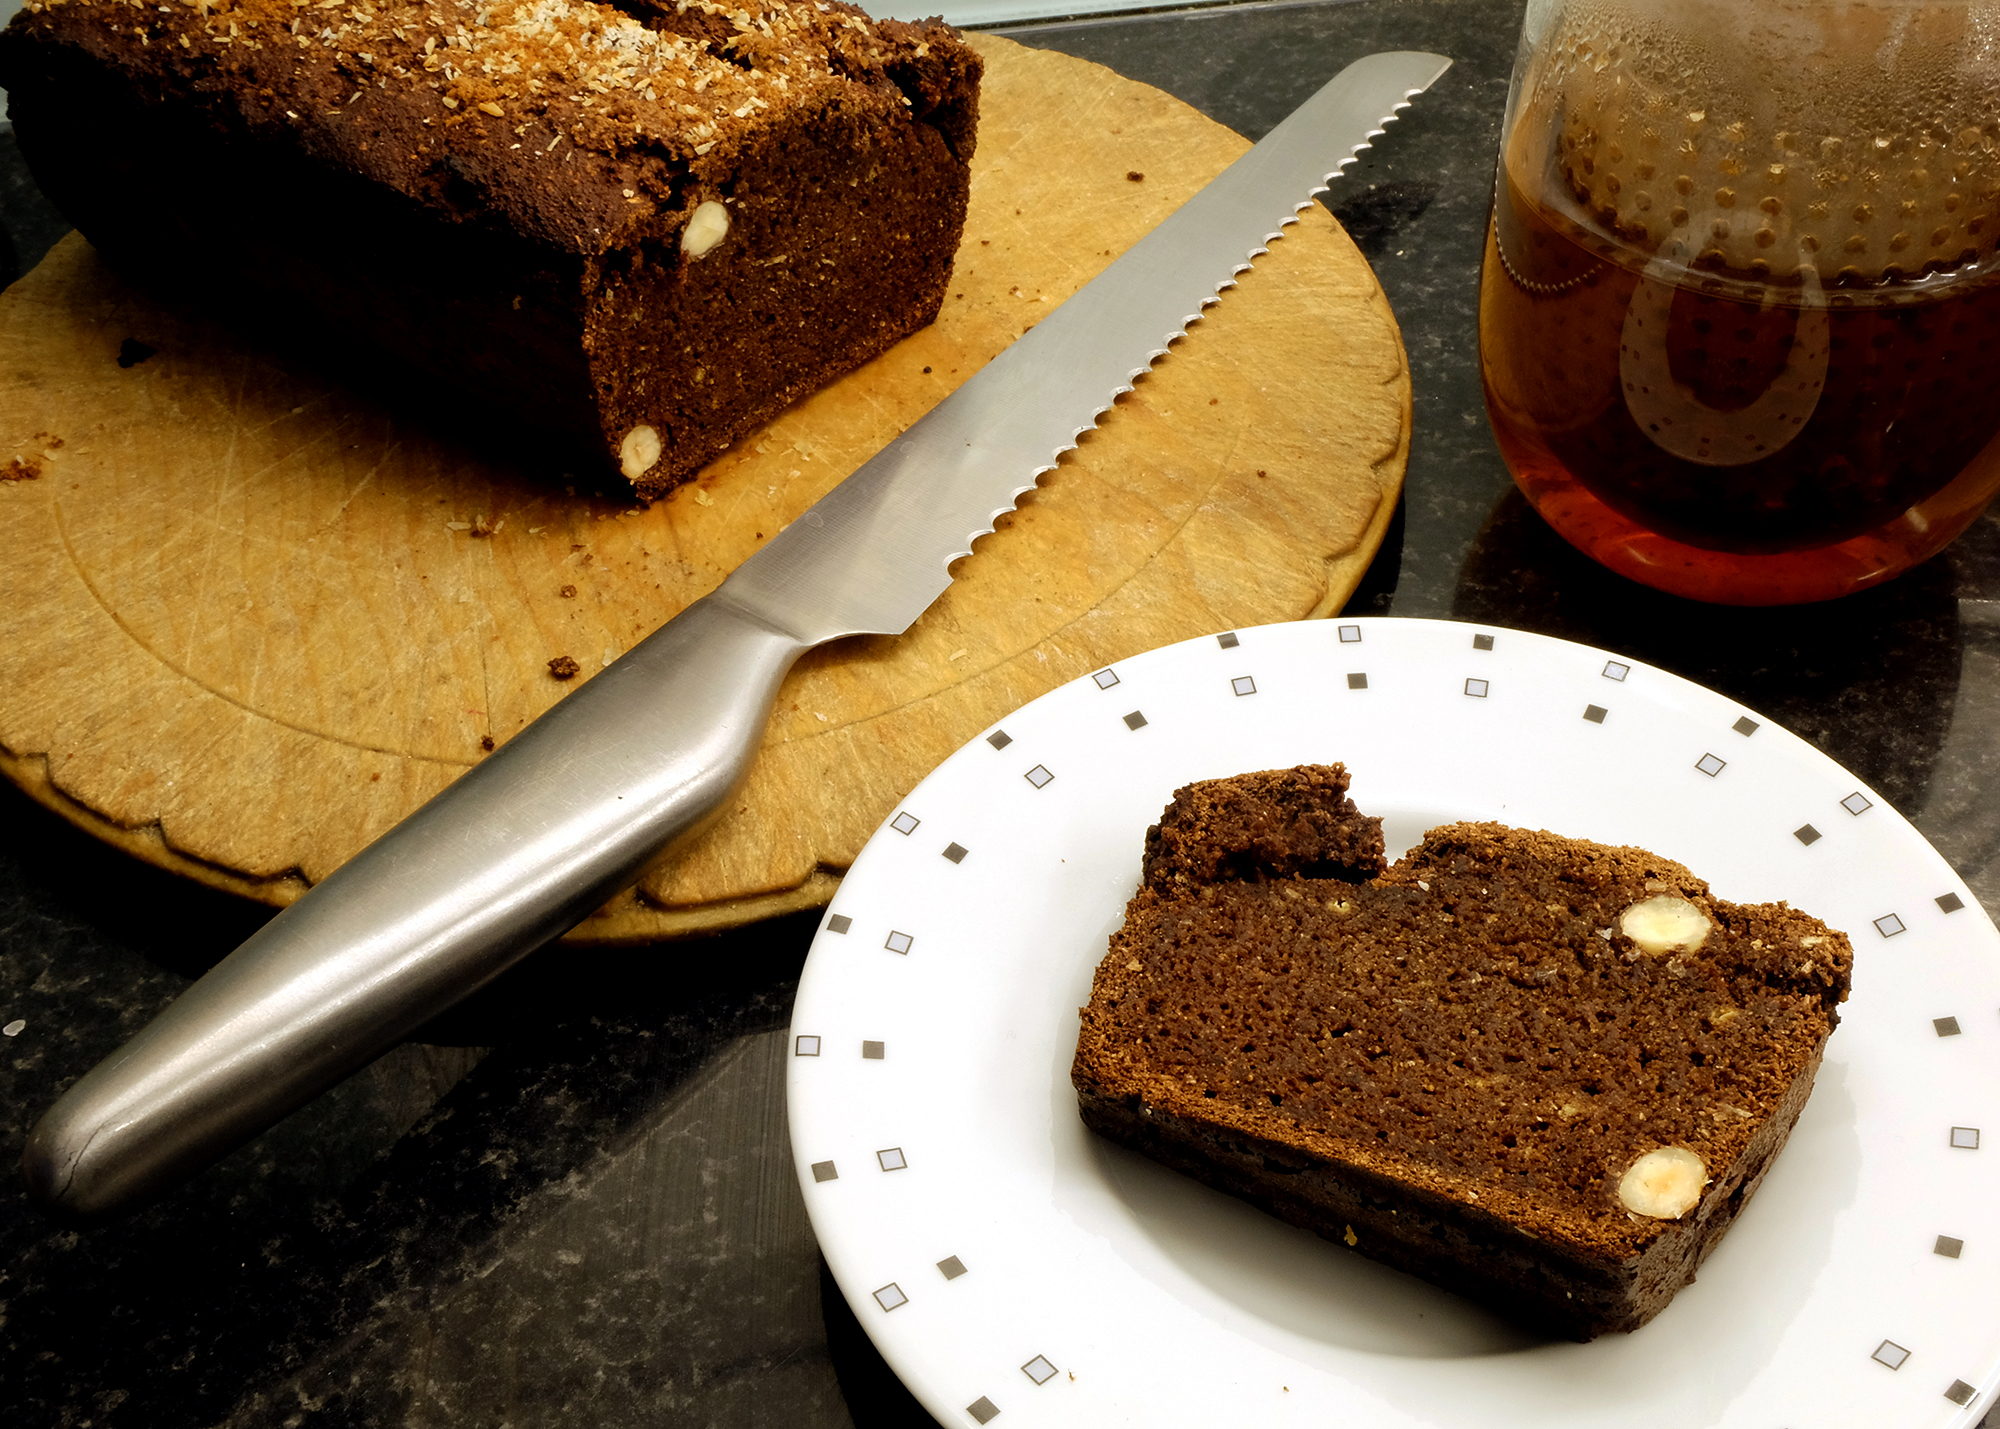 A recipe: Dust cake,  a ‘free’ cocoa brownie